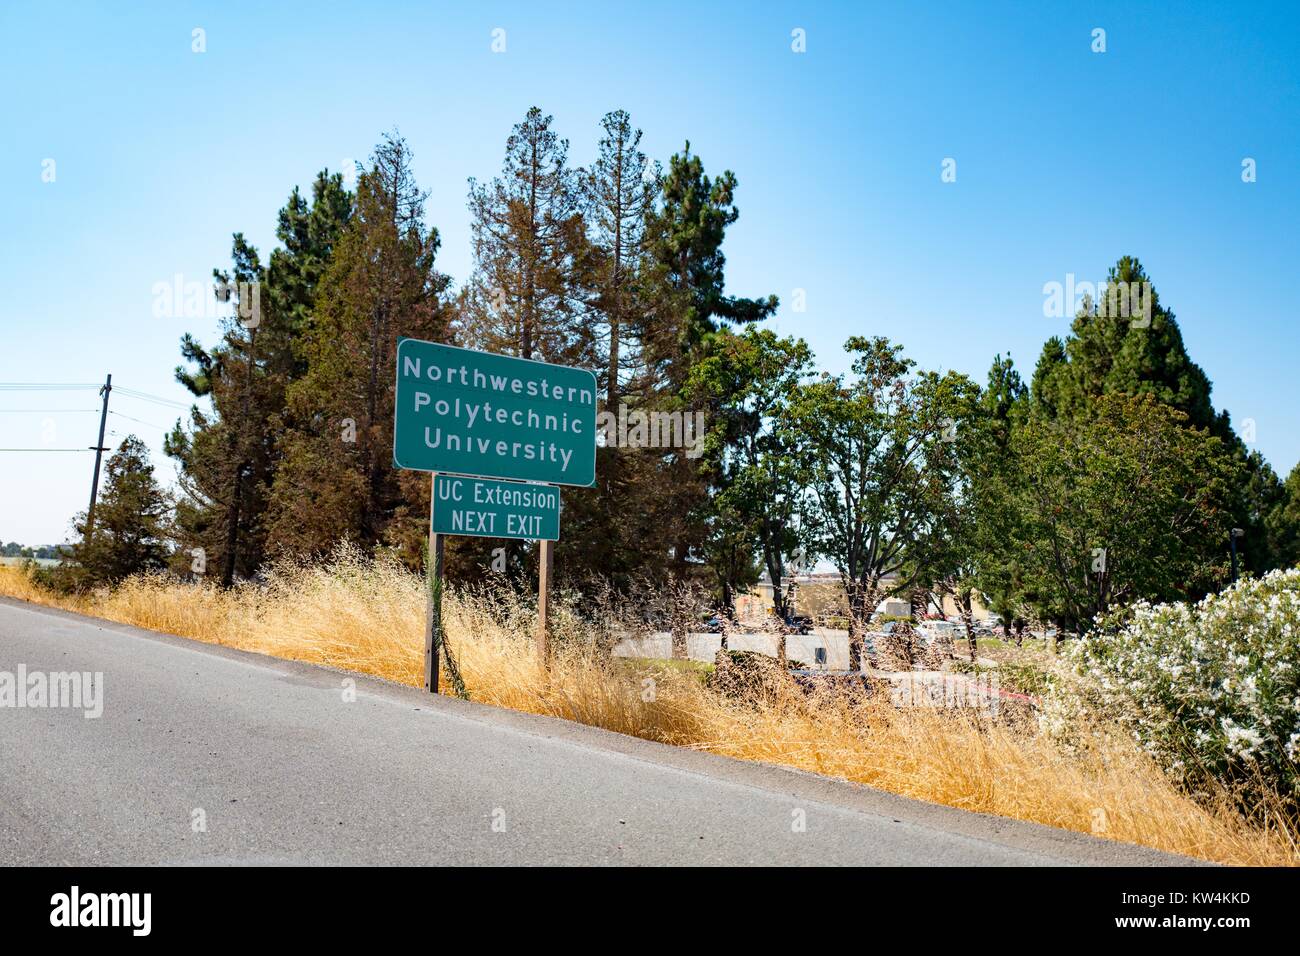 Road sign for Northwestern Polytechnic University, a non-profit university in the Silicon Valley town of Fremont, California, August 25, 2016. Stock Photo